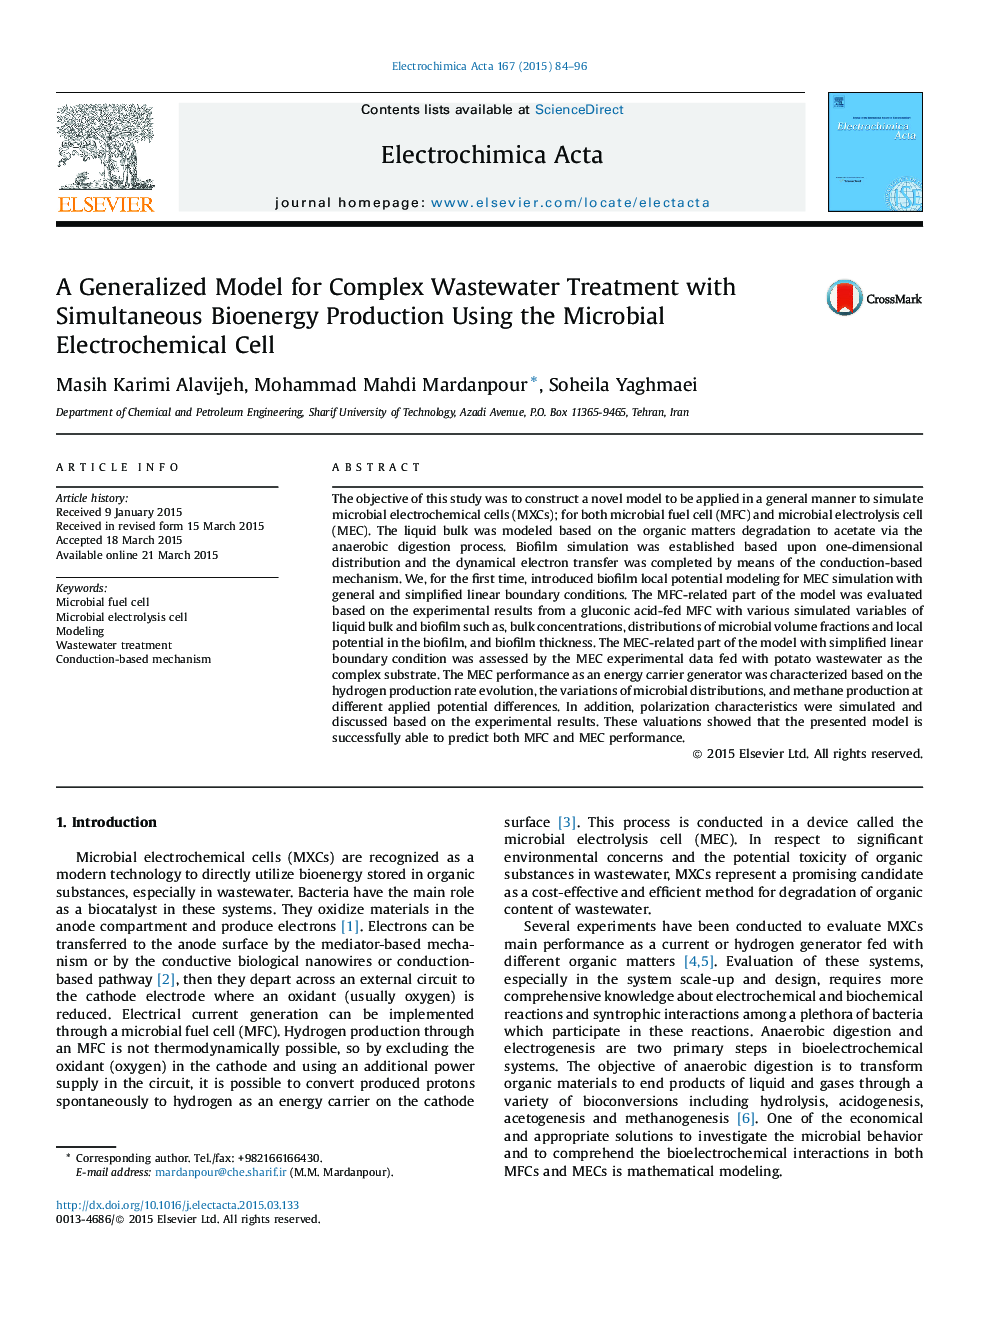 A Generalized Model for Complex Wastewater Treatment with Simultaneous Bioenergy Production Using the Microbial Electrochemical Cell